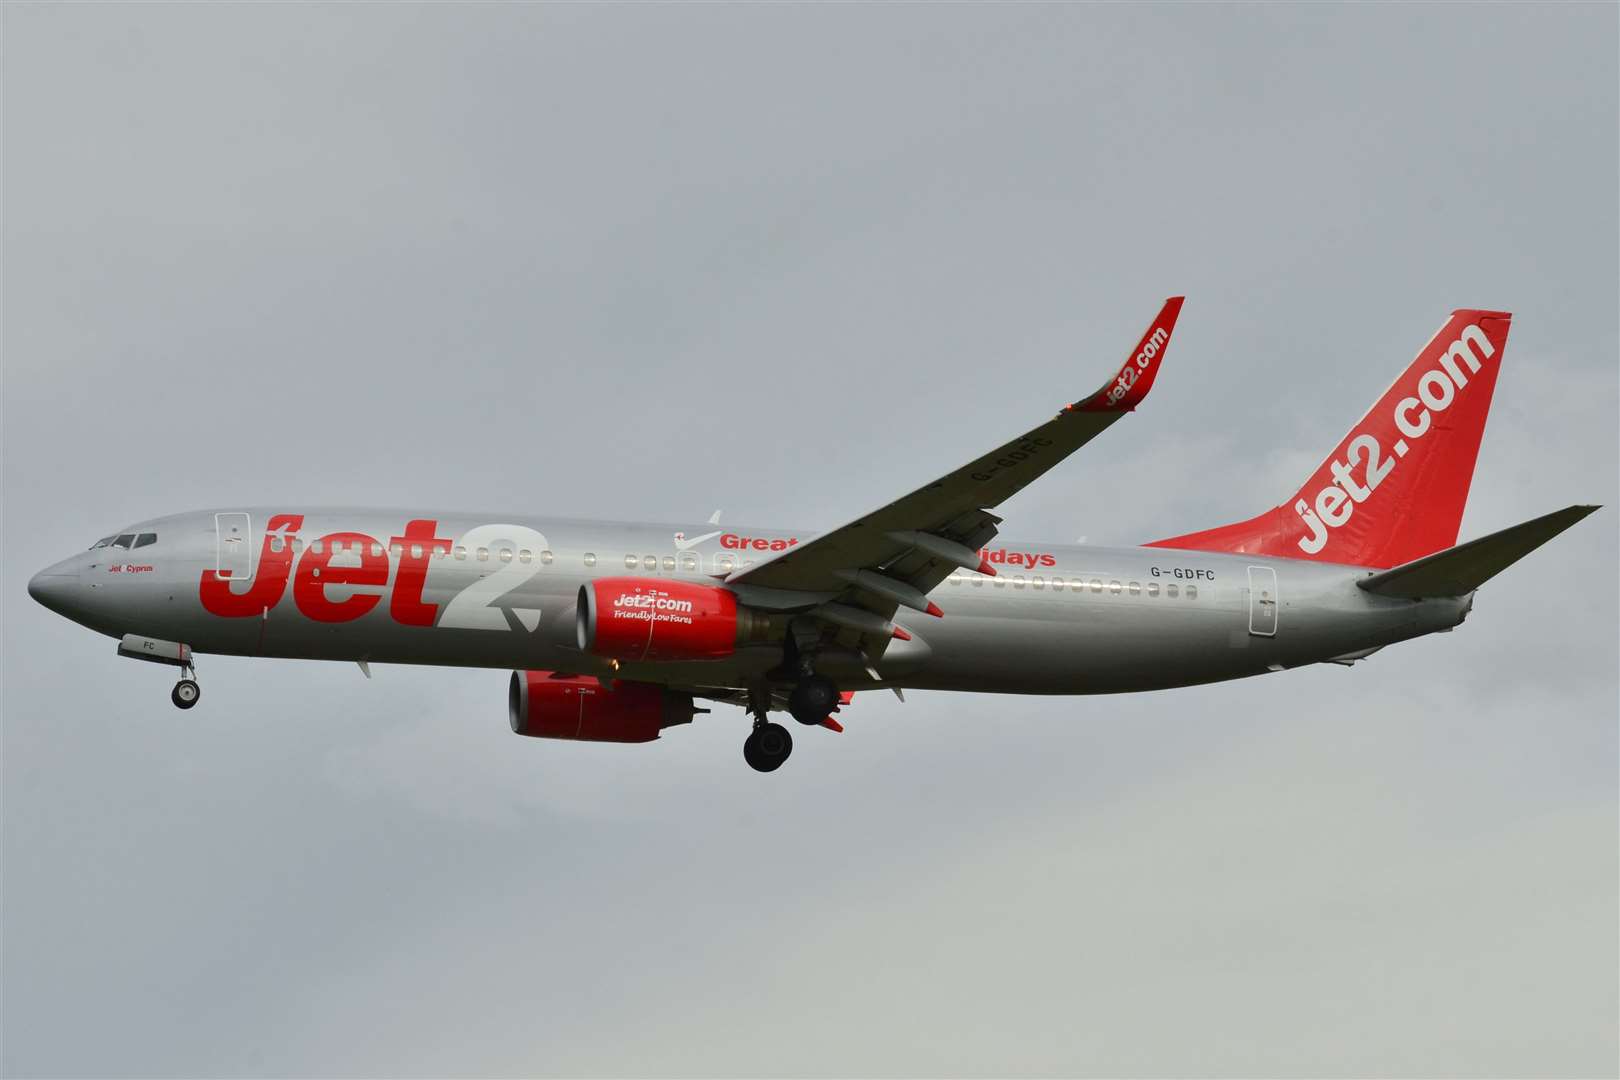 A 25-year-old woman allegedly attempted to open the cockpit door during a Jet2 flight from Stansted to Turkey